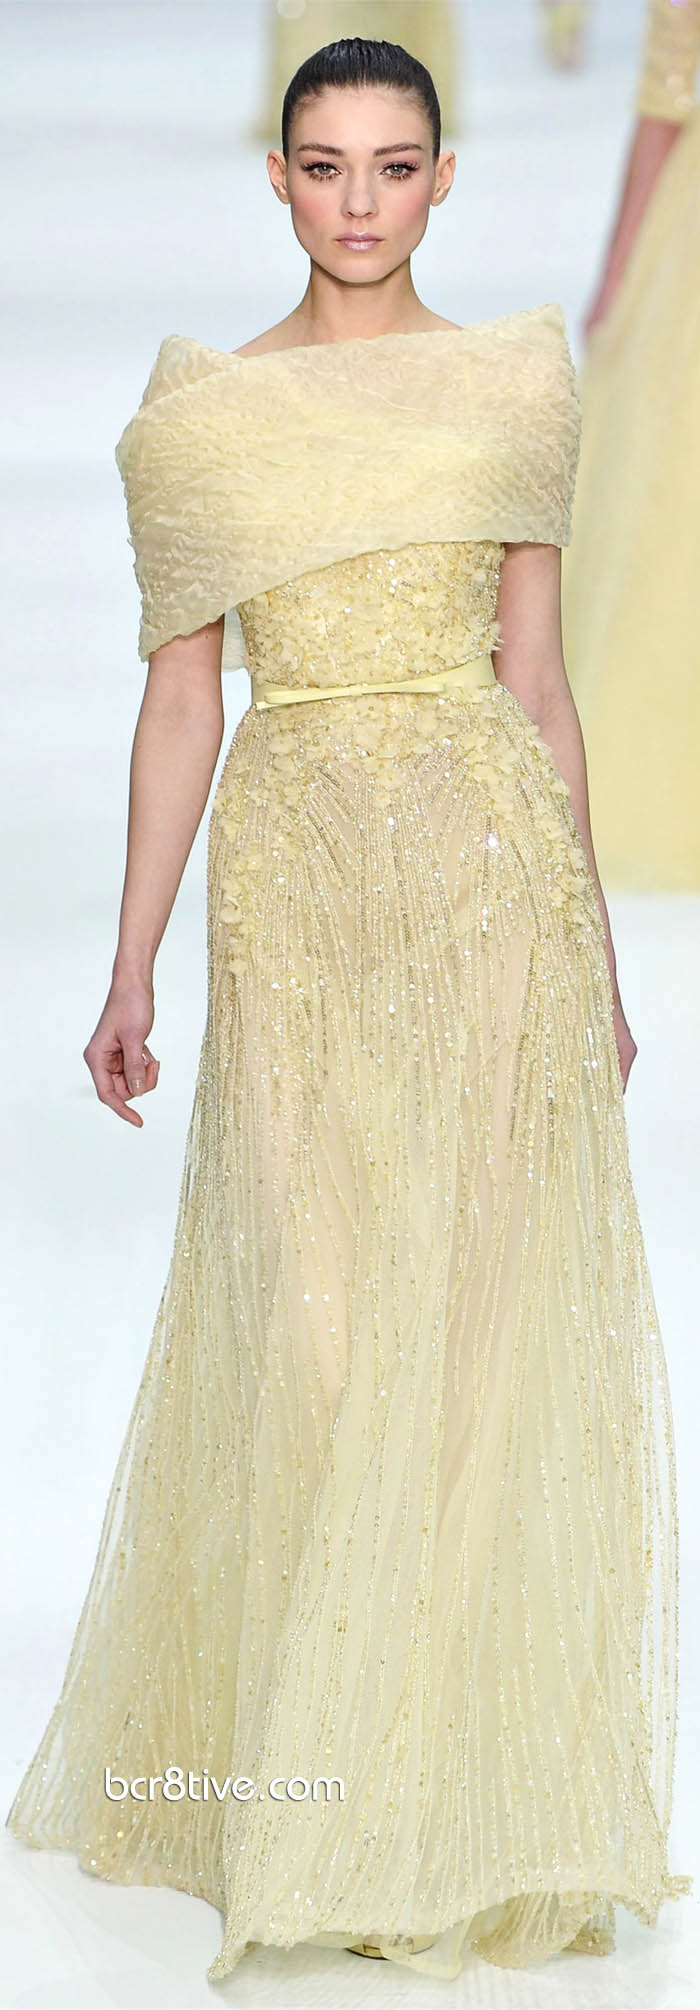 Elie Saab Spring Summer 2012 Haute Couture – Be Creative